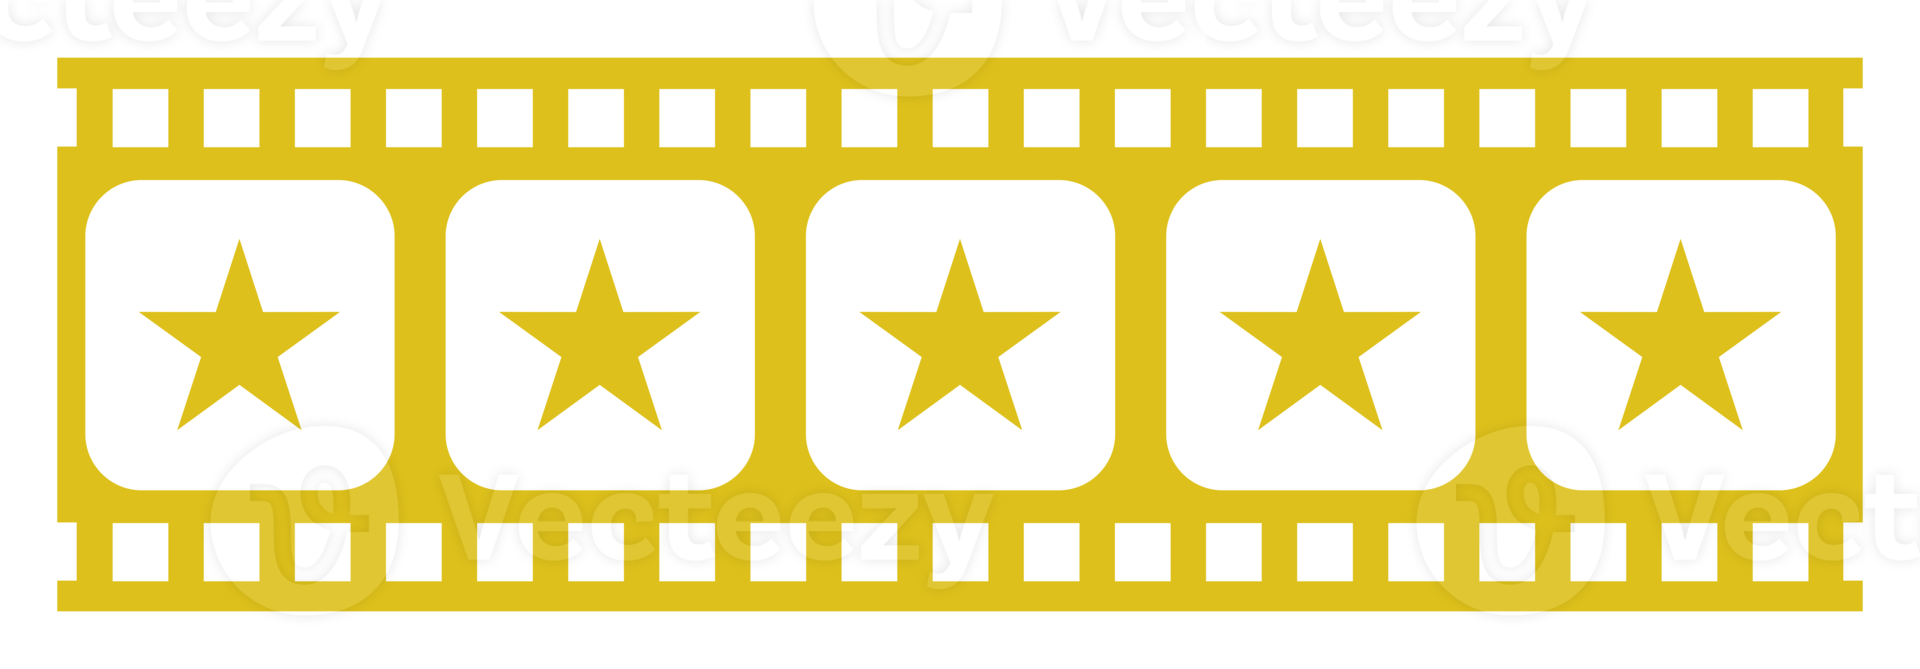 Visual of the Five 5 Star Sign in the Film Stripe Silhouette. Star Rating Icon Symbol for Film or Movie Review, Pictogram, Apps, Website or Graphic Design Element. Rating 5 Star. Format PNG